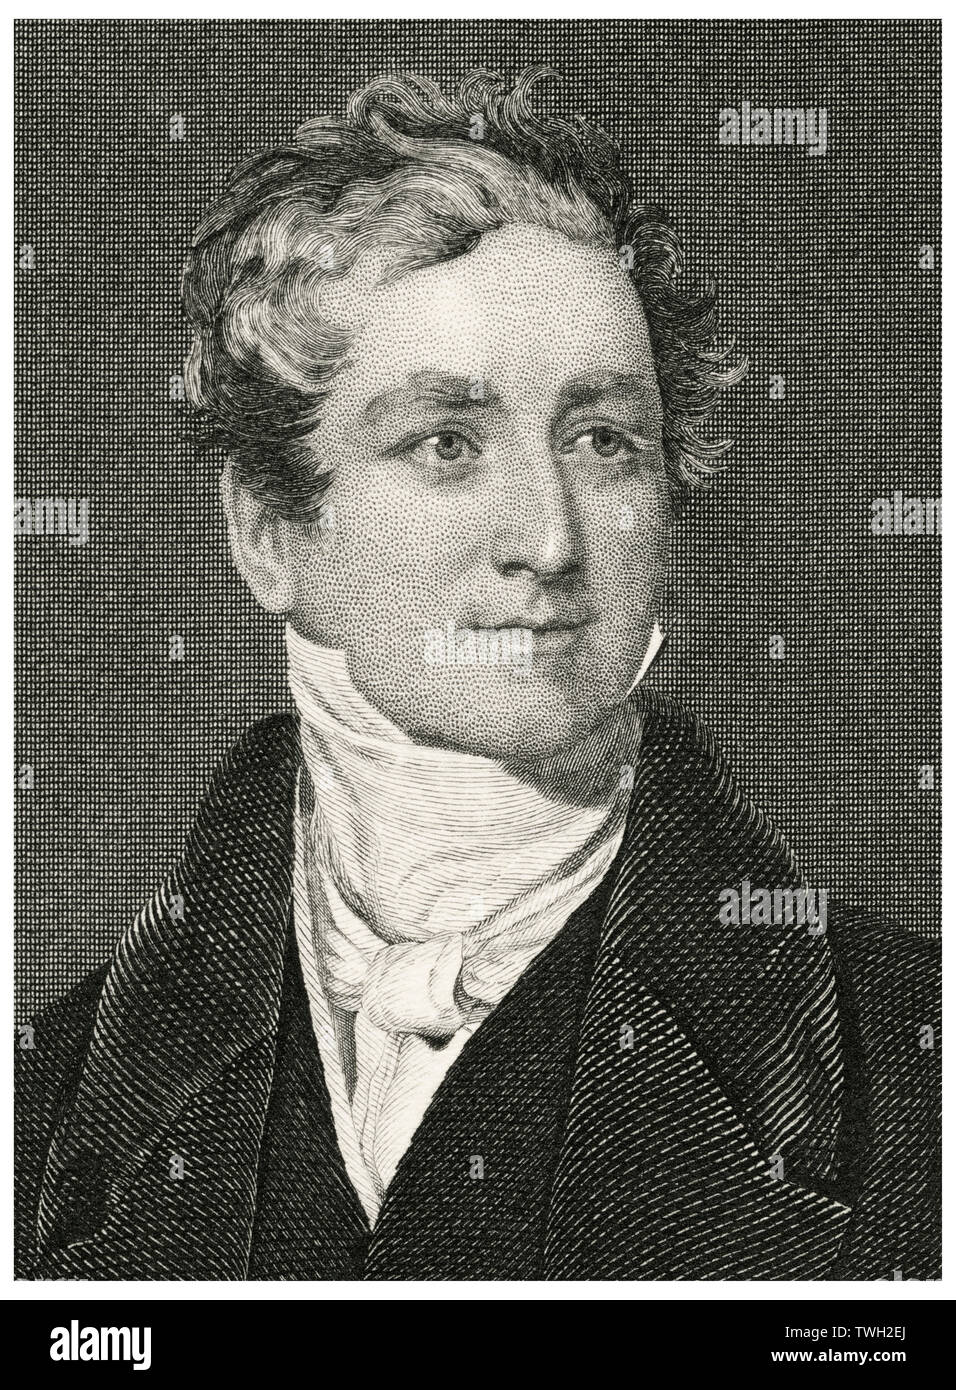 Sir Robert Peel (1788-1850), 2nd Baronet, British Statesman and Politician, Served Twice as Prime Minister of the United Kingdom 1834-35, 1841-46, Head and Shoulders Portrait, Steel Engraving, Portrait Gallery of Eminent Men and Women of Europe and America by Evert A. Duyckinck, Published by Henry J. Johnson, Johnson, Wilson & Company, New York, 1873 Stock Photo